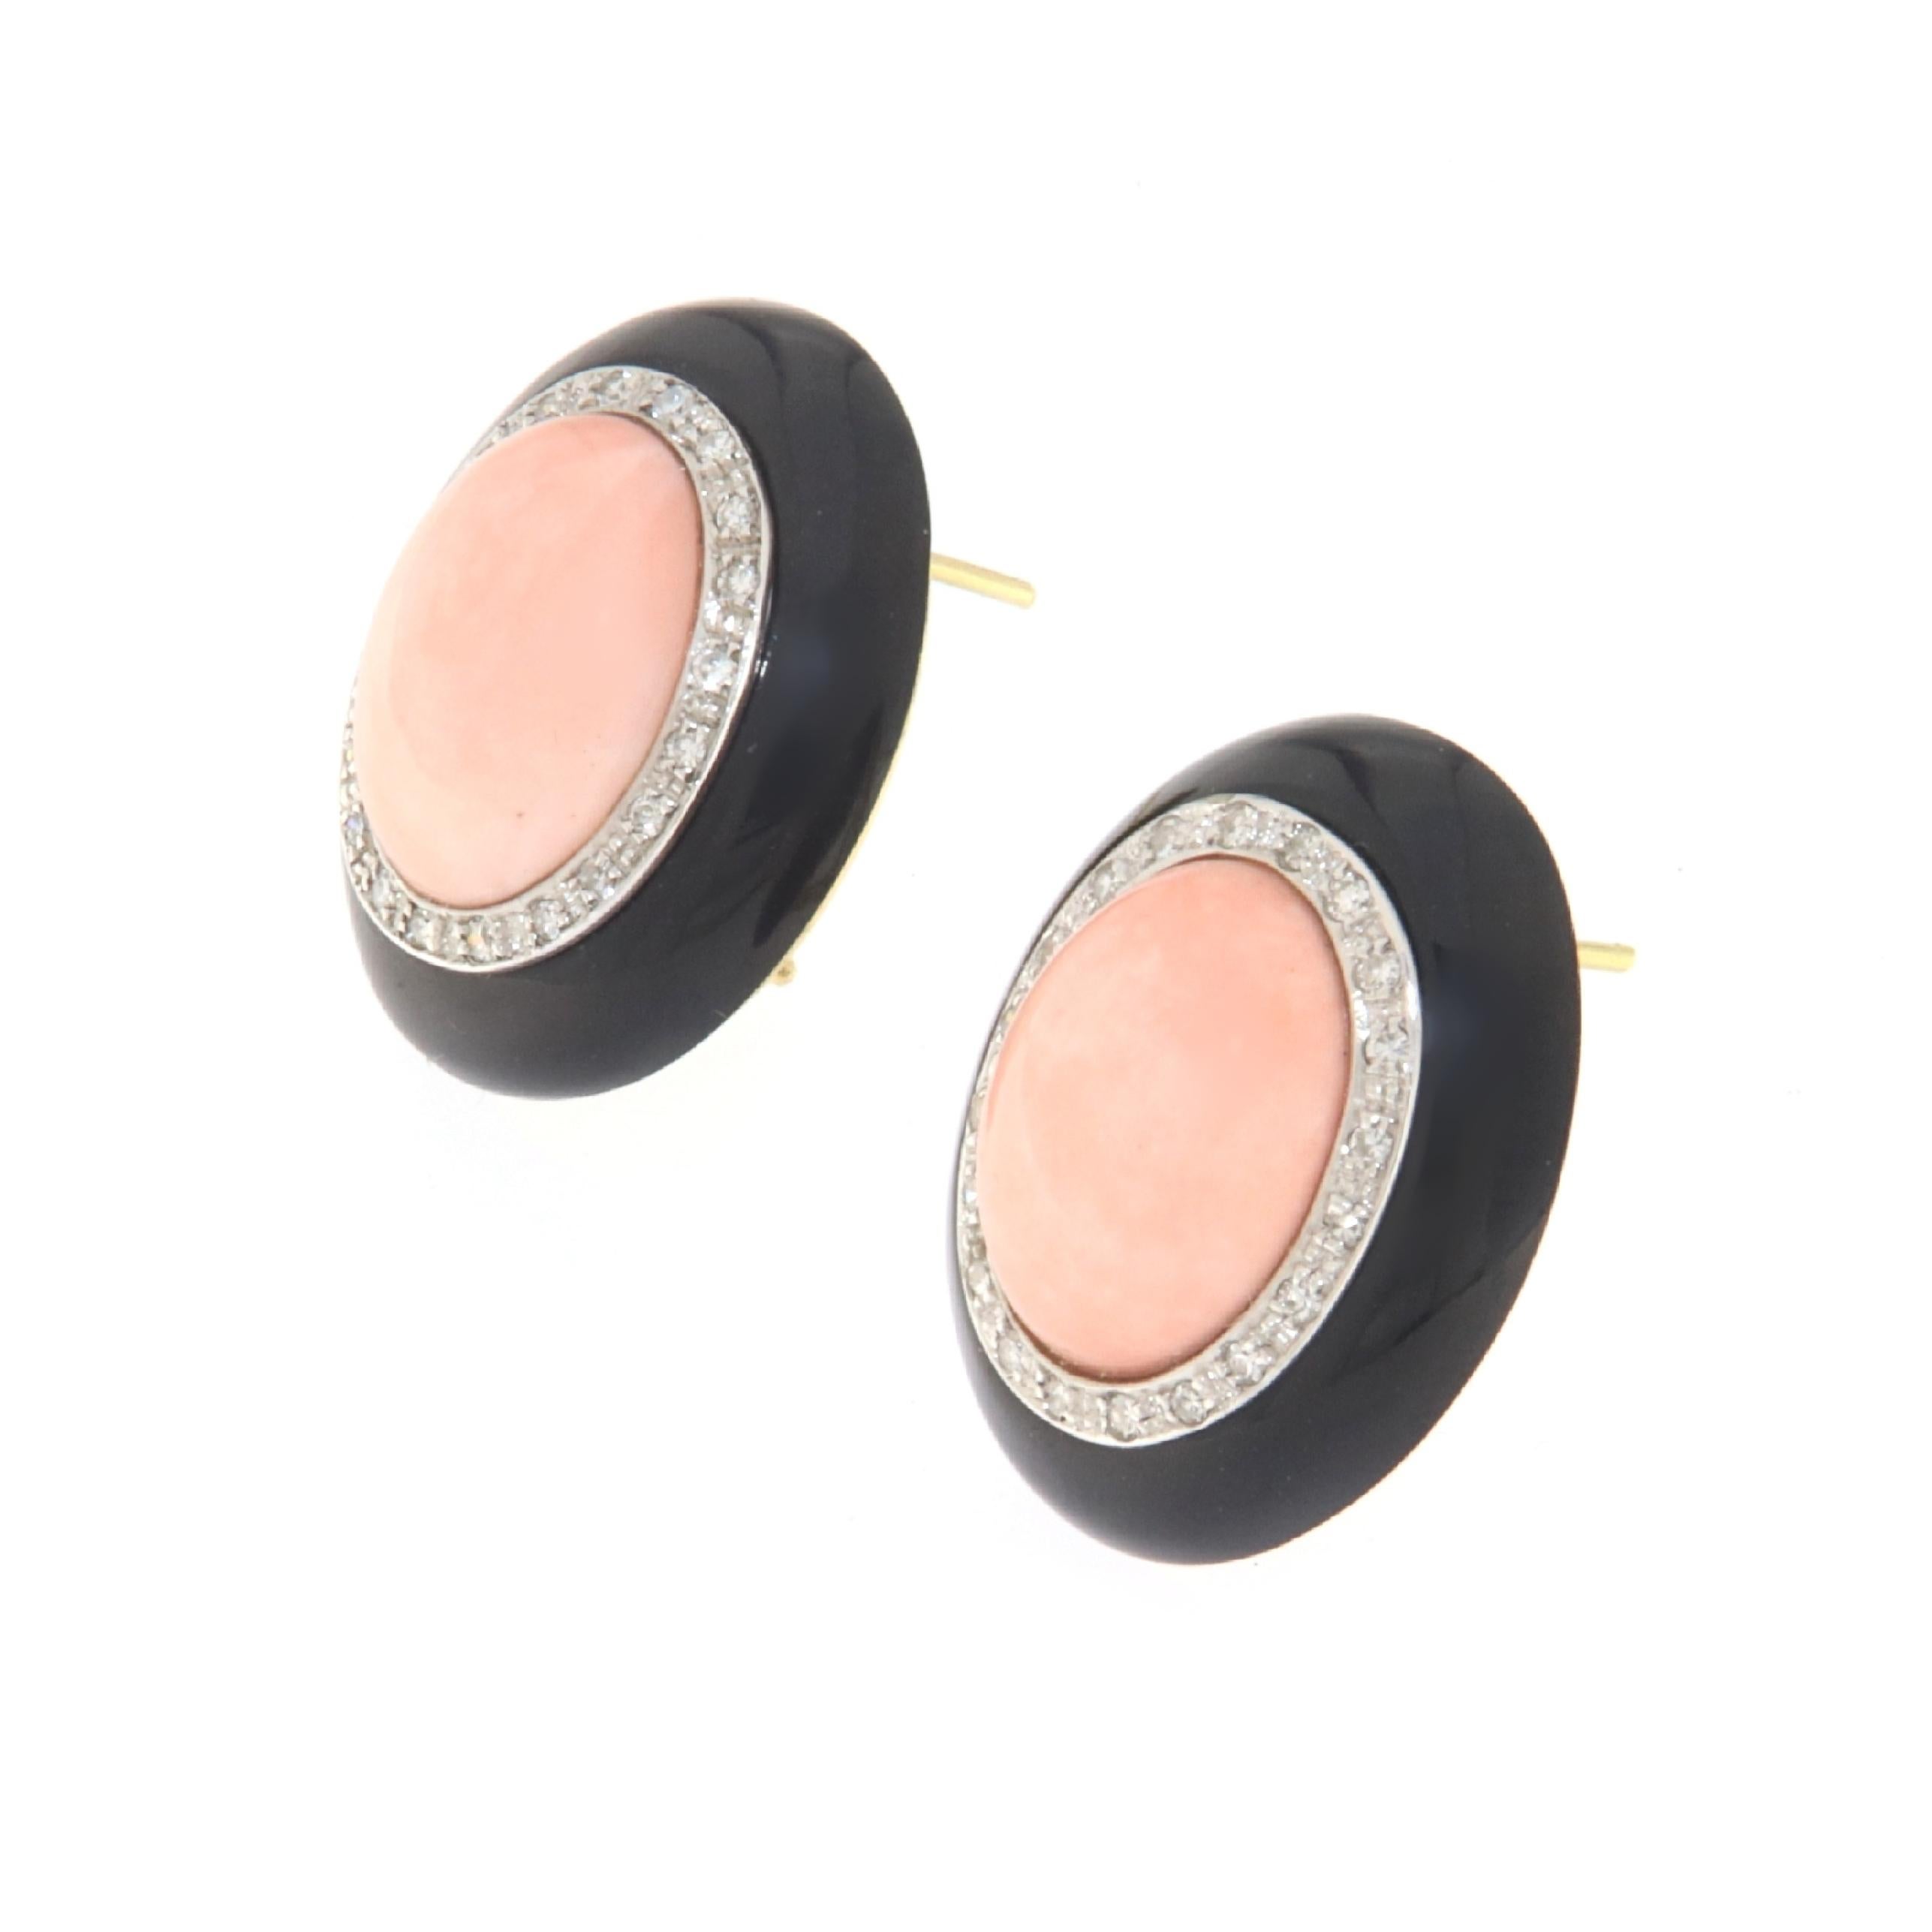 These chic earrings are a masterful display of luxury, meticulously crafted from 18-karat white and yellow gold. Each earring is adorned with a central piece of soft-hued coral, set against a striking backdrop of glossy black onyx. The coral inserts